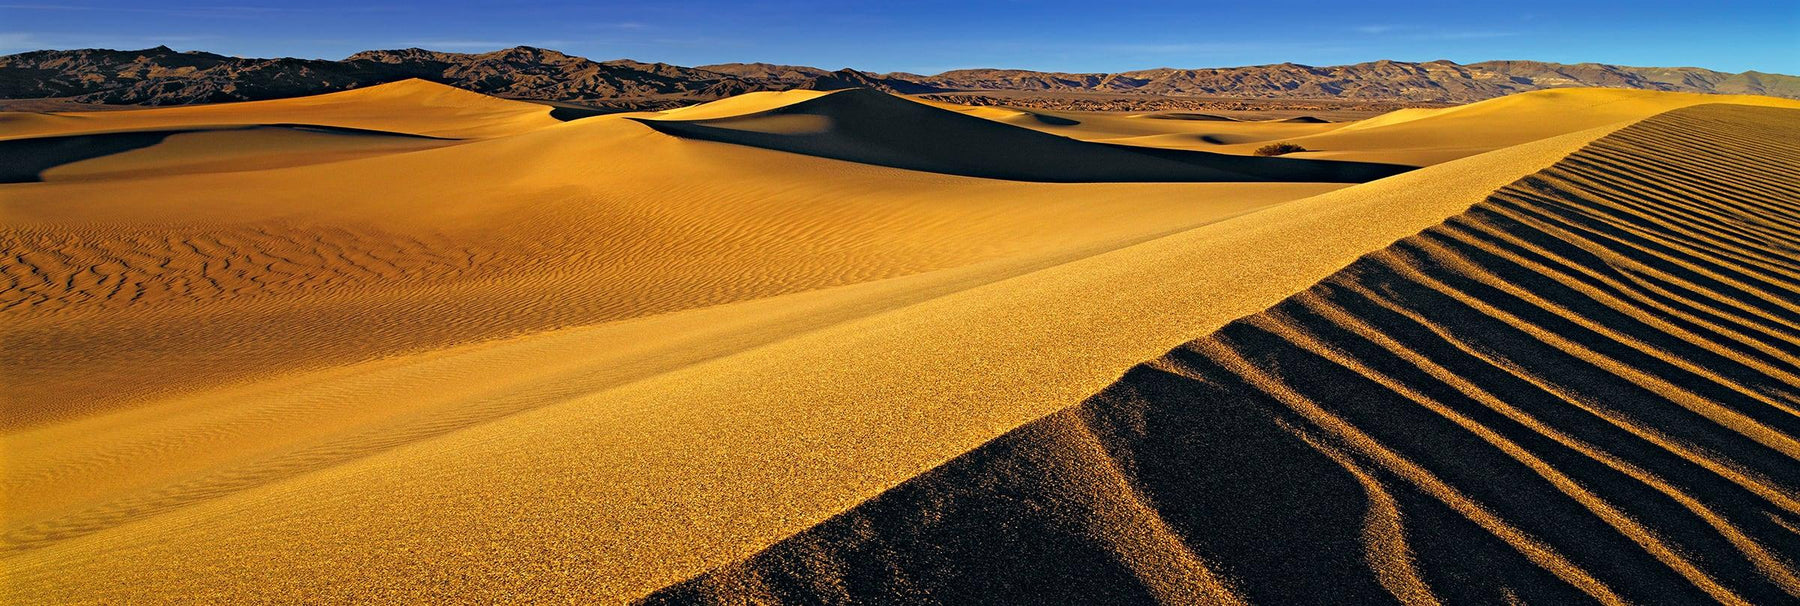 Yellow windswept sand dunes in front of the rock hills of Death Valley California